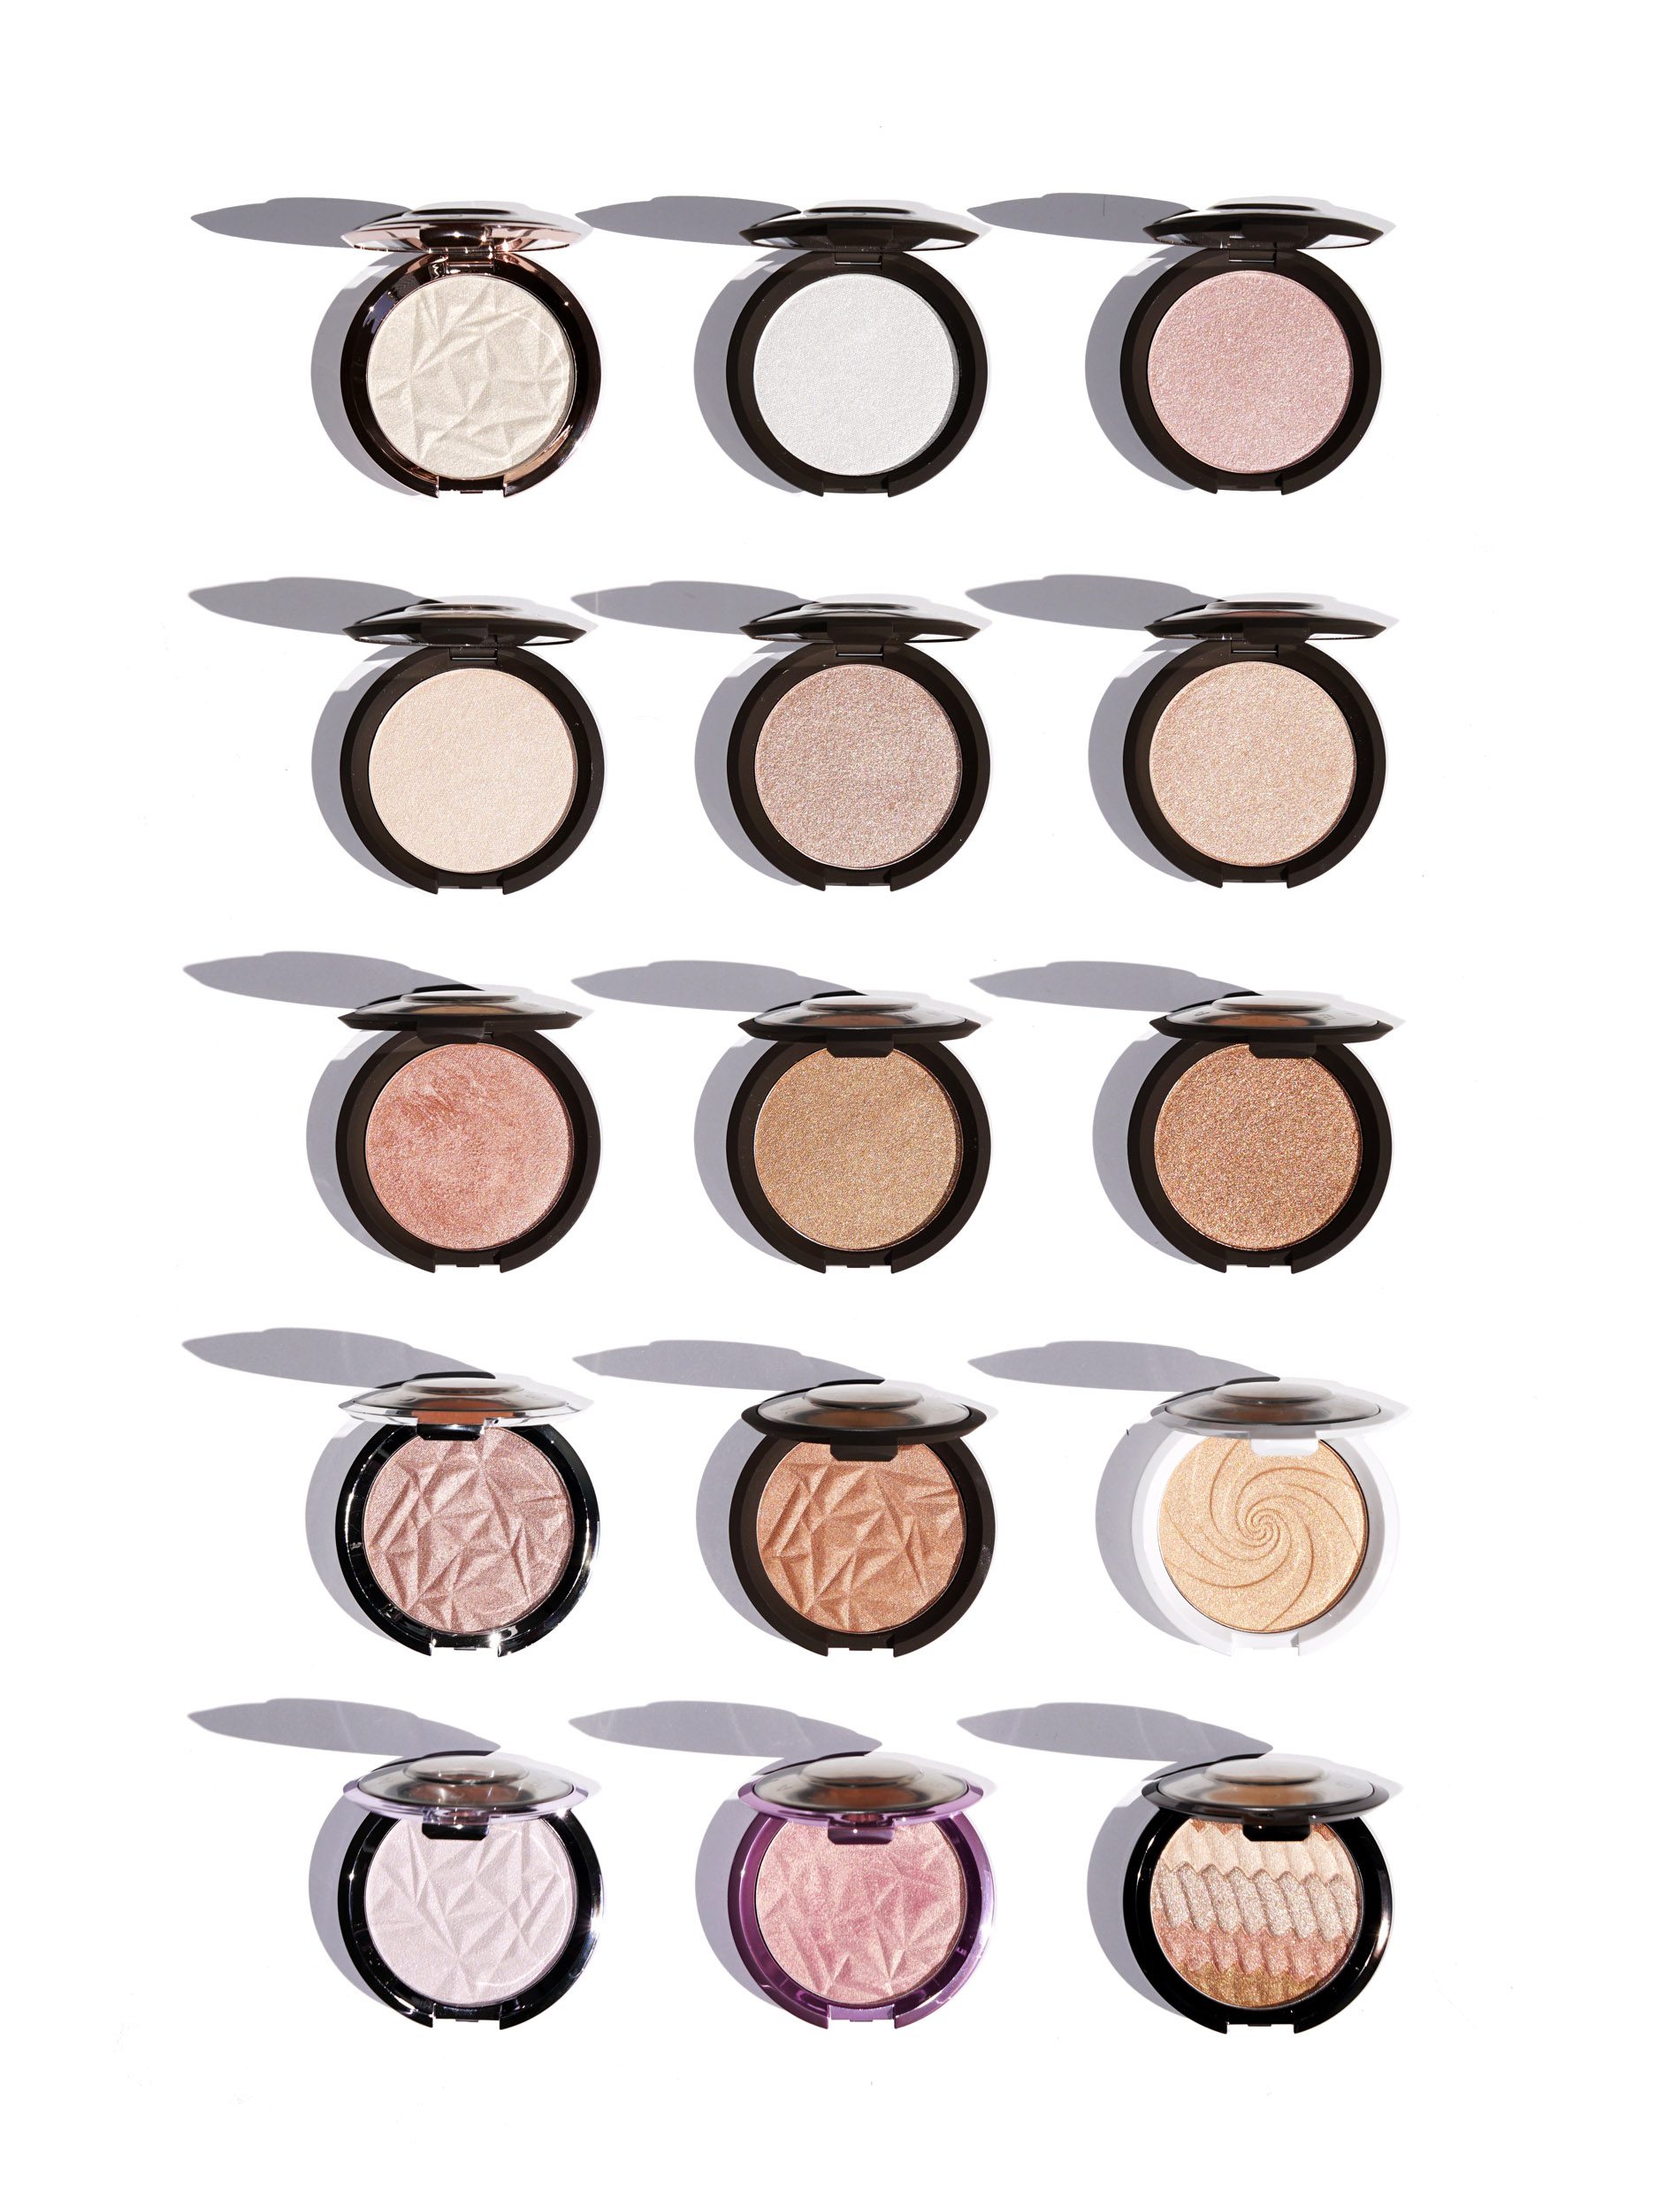 Becca Shimmering Skin Perfector Pressed Highlighter Swatches - Beauty Look Book